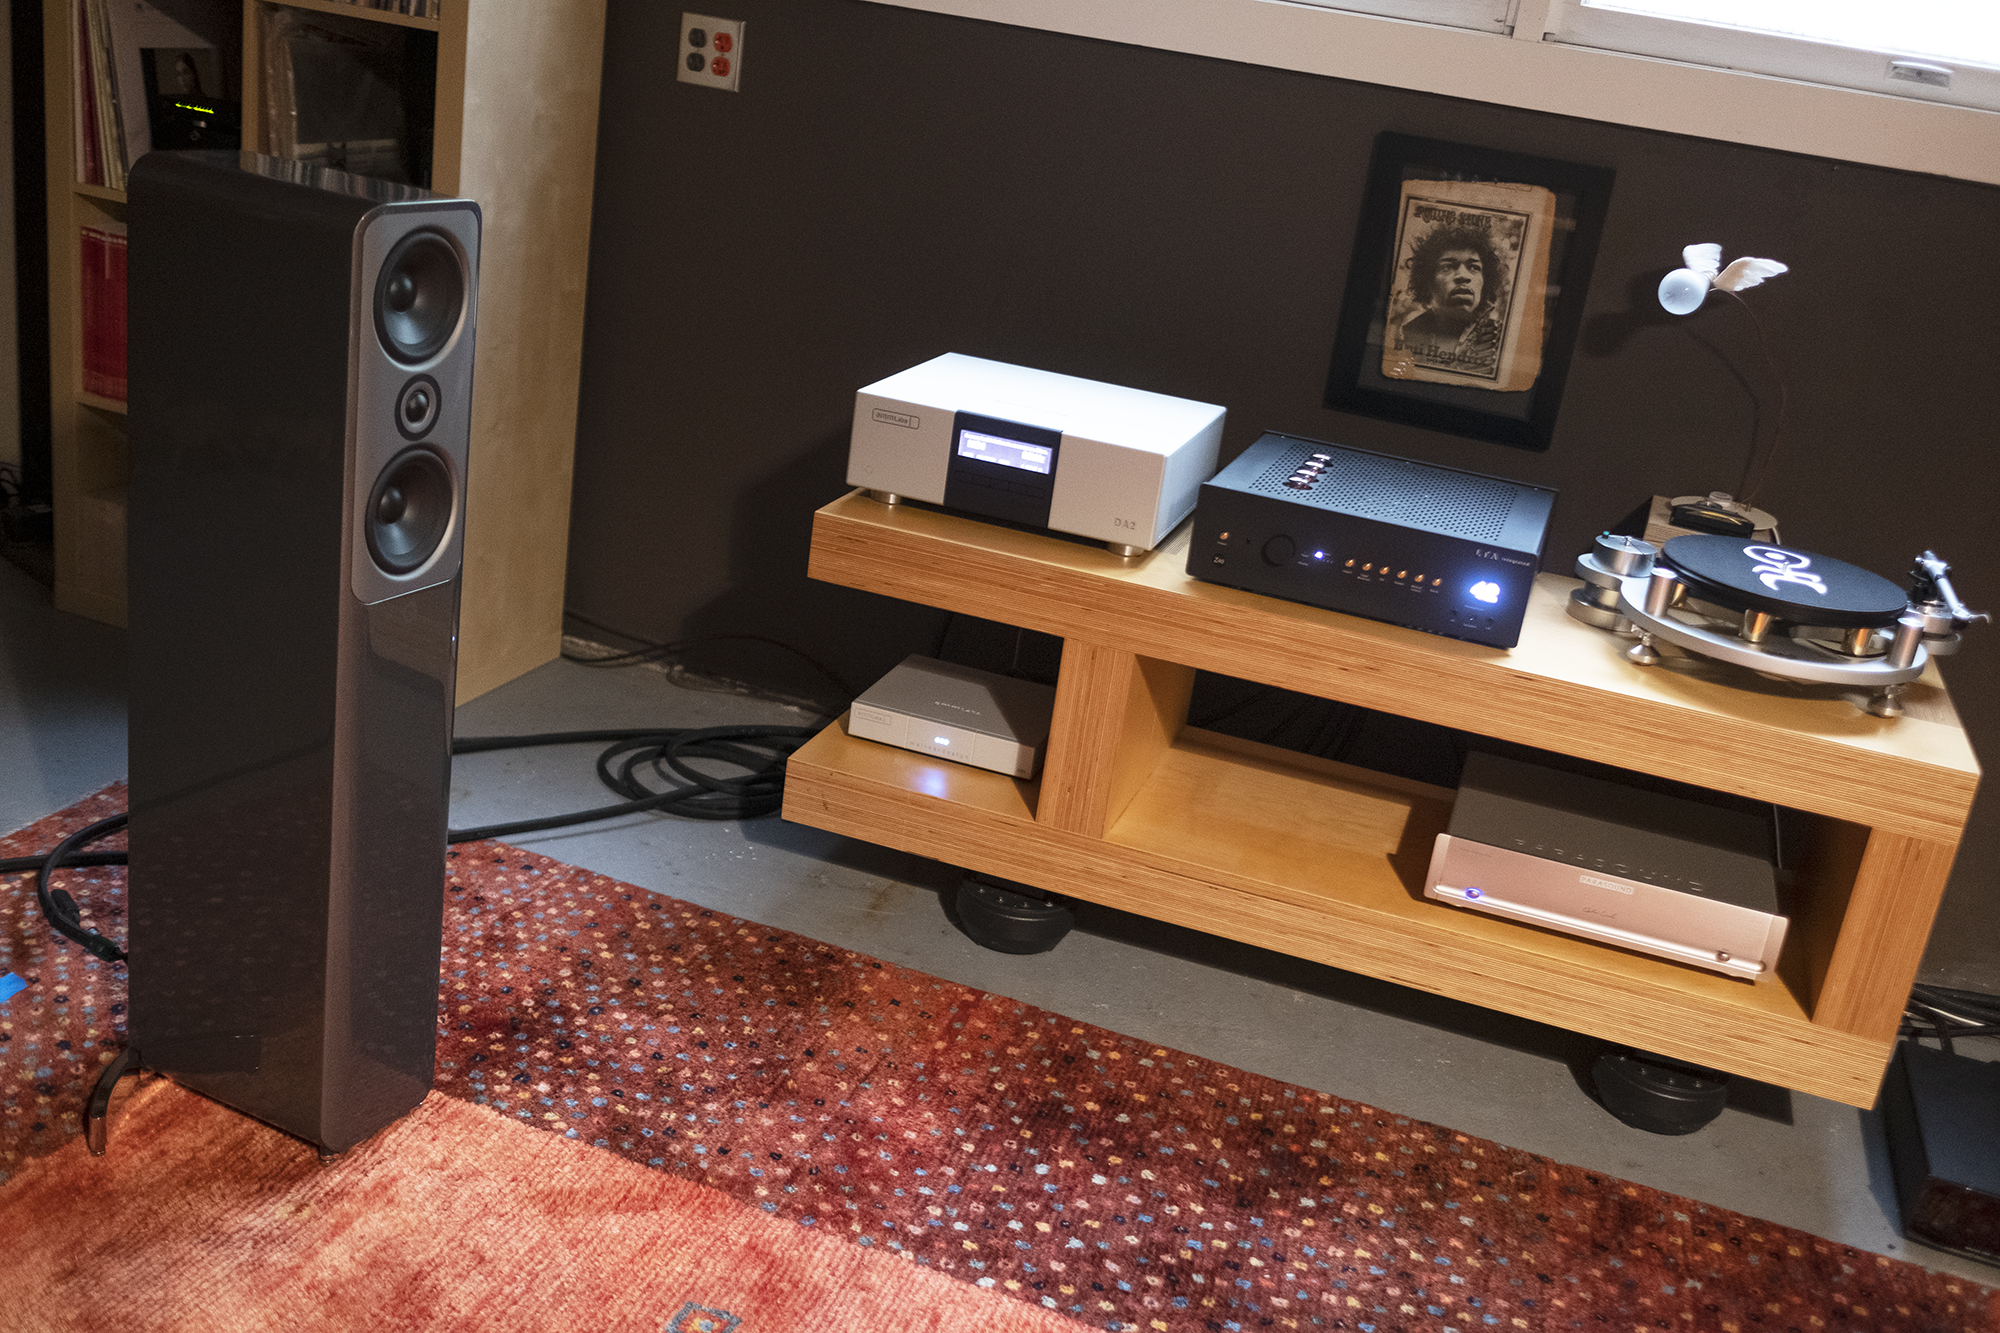 New Q Acoustics Concept 50 5.1 Home Theater System